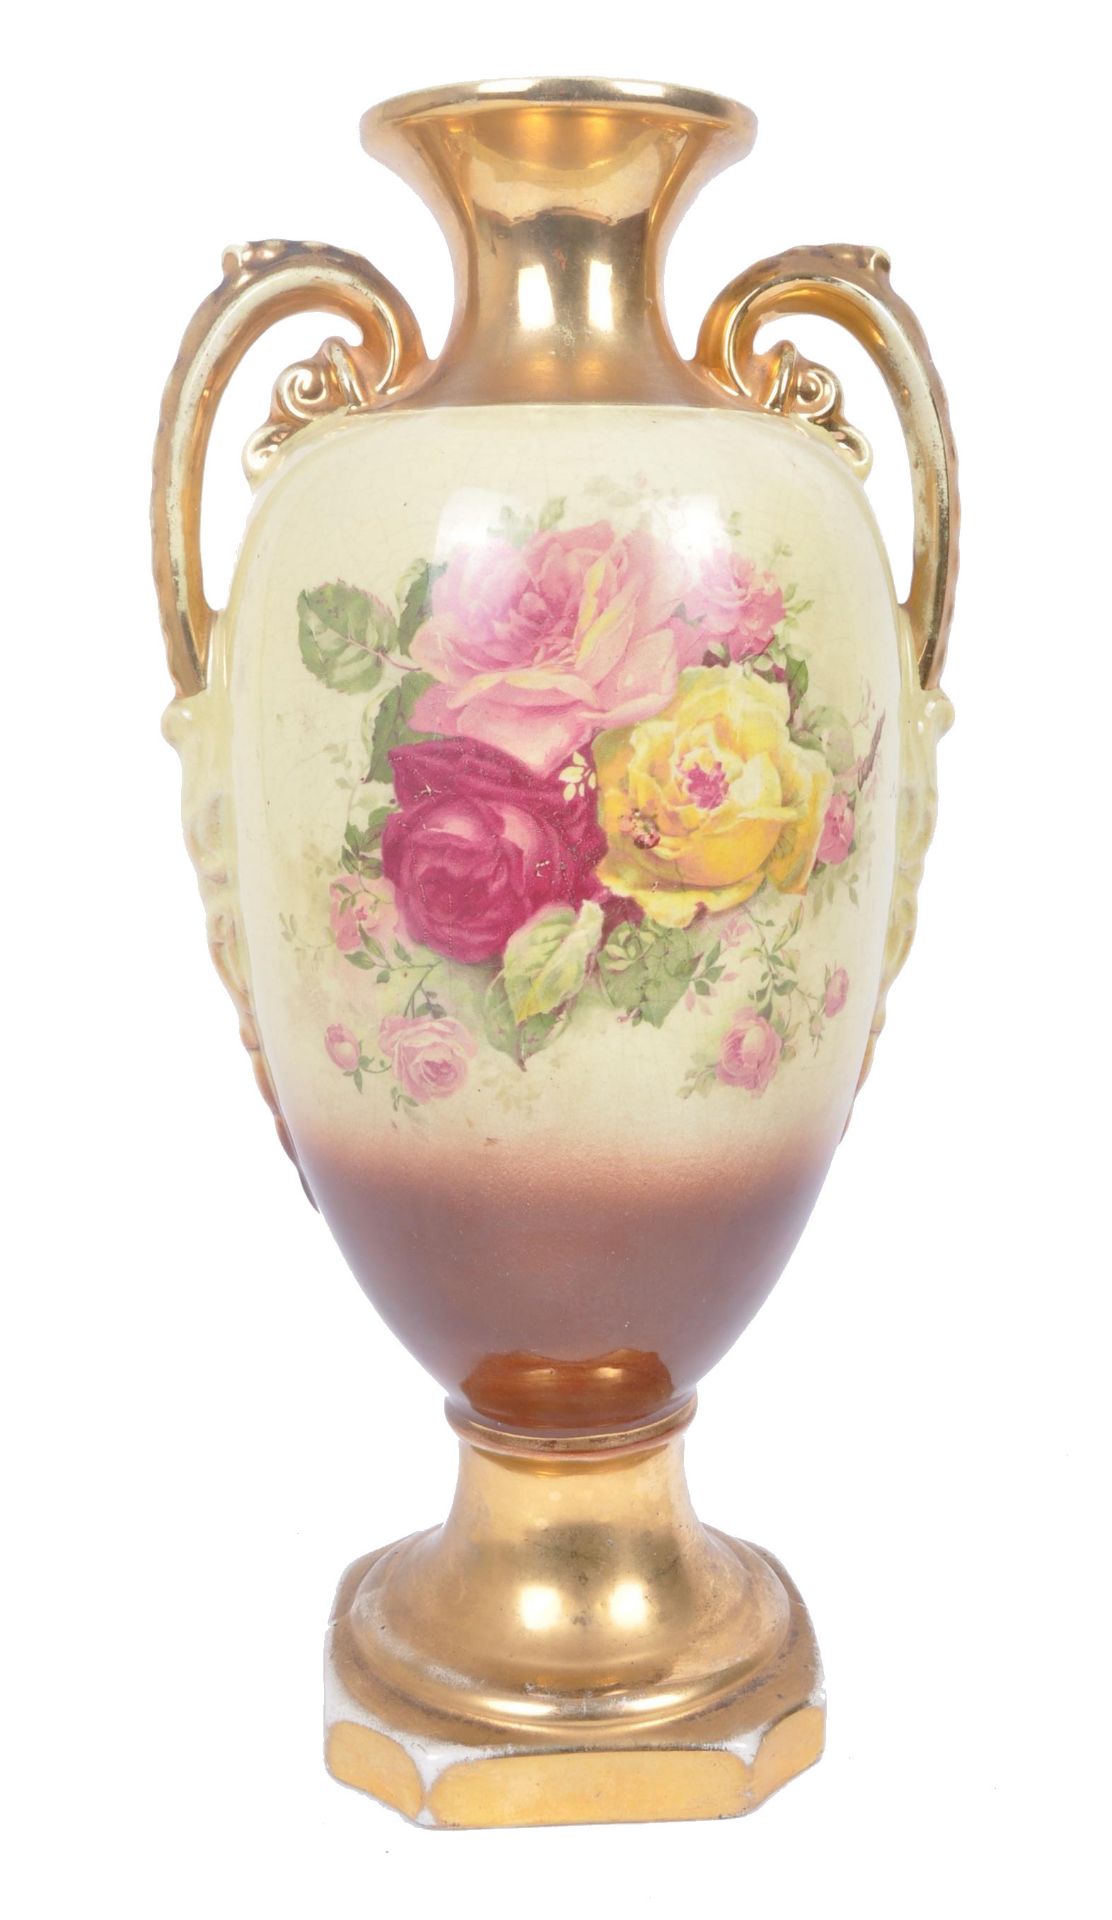 A VICTORIAN 19TH CENTURY TWIN HANDLED STAFFORDSHIRE VASE